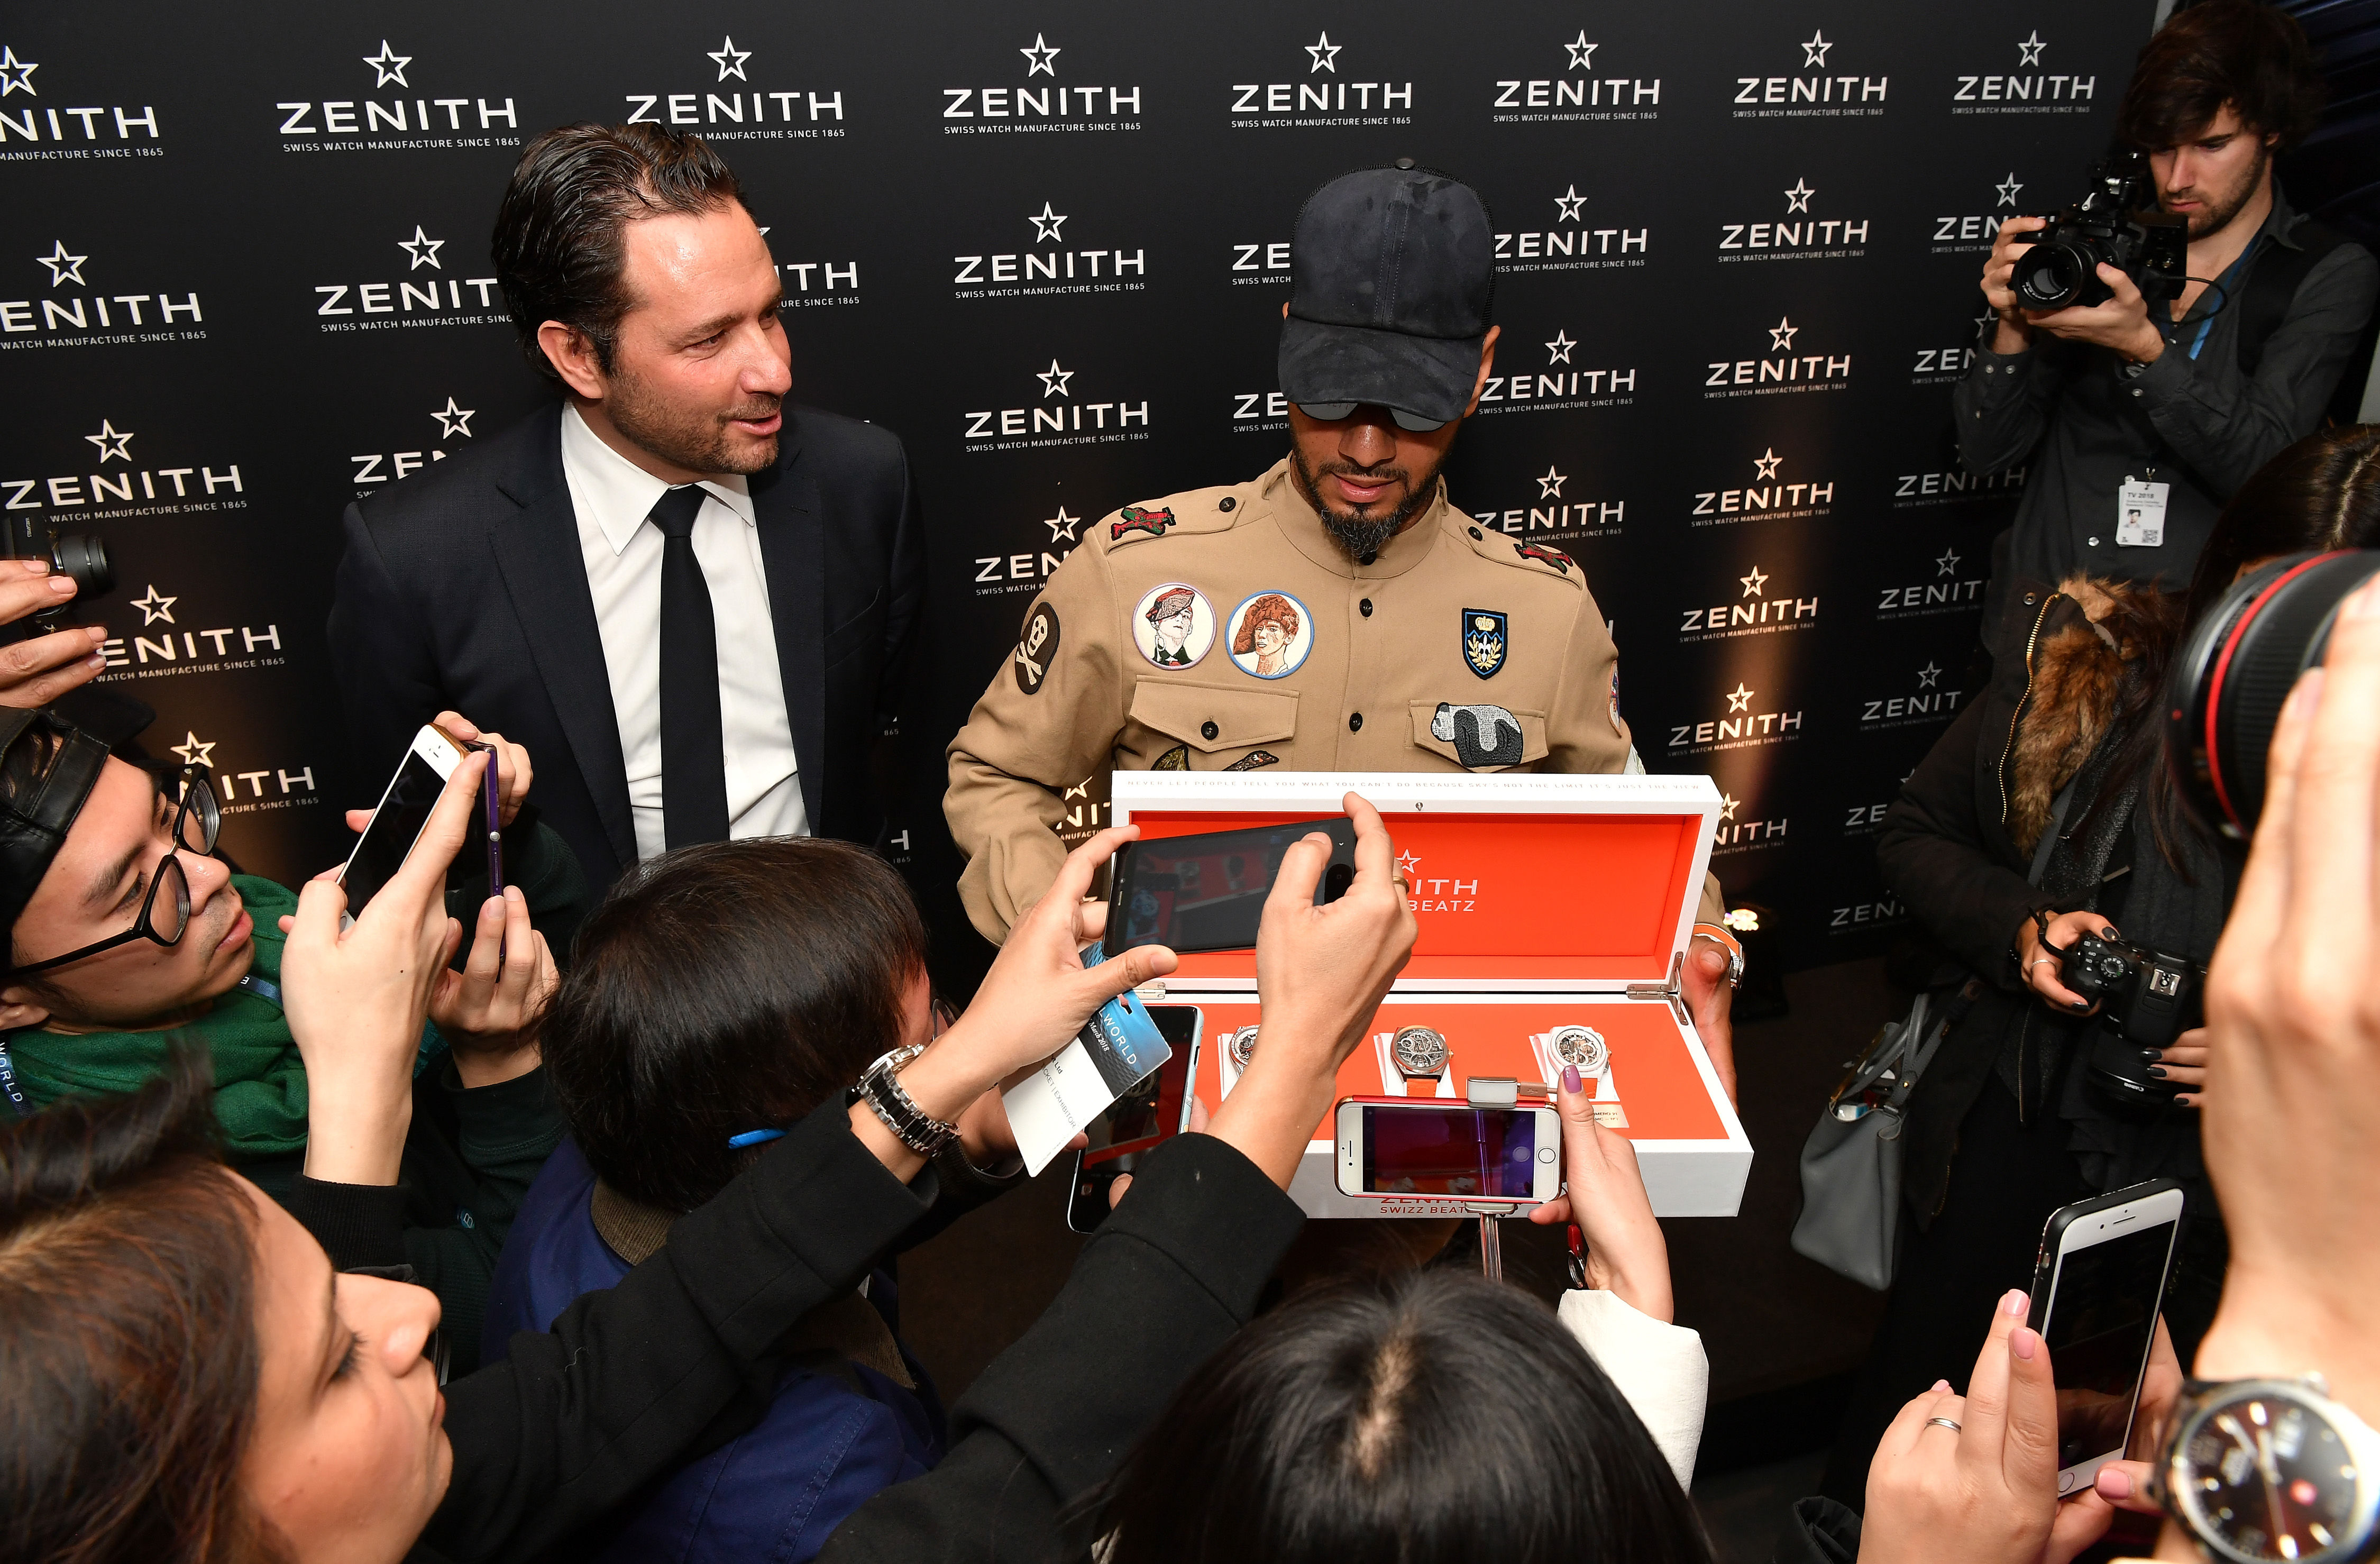 Zenith Press Conference At Baselworld 2018